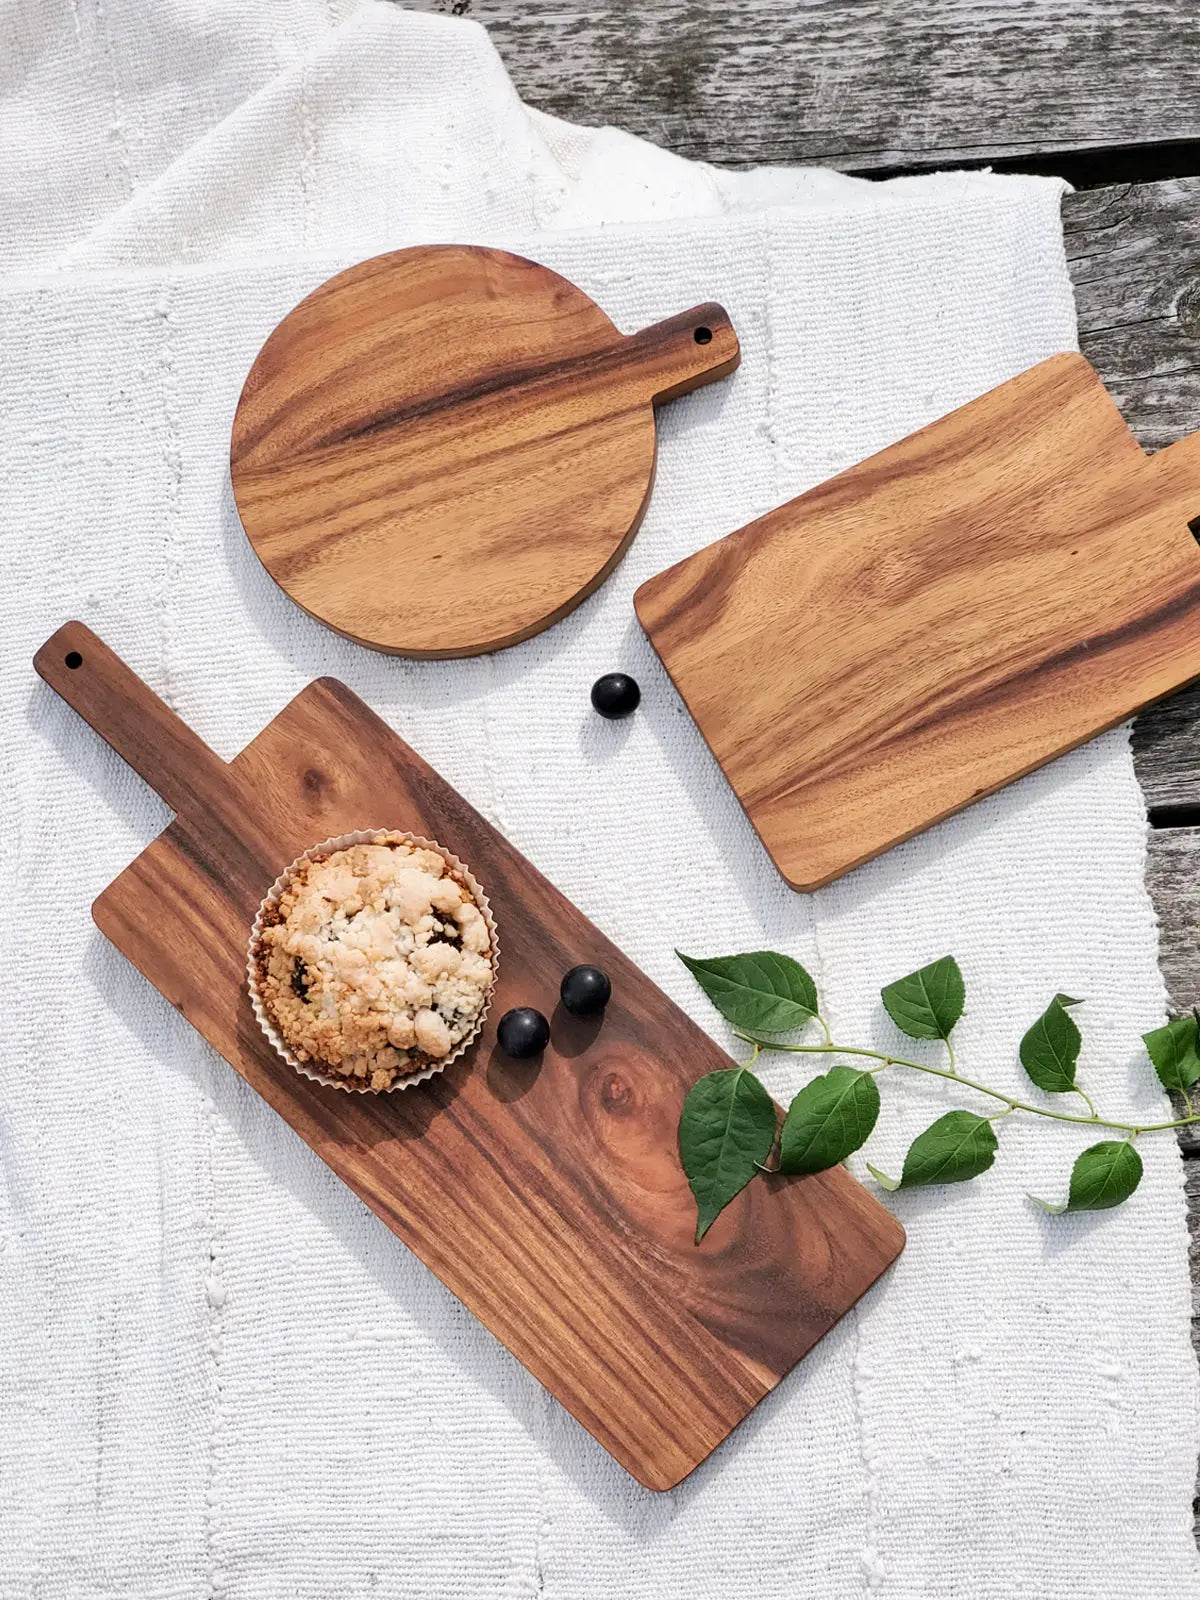 SPEShh Acacia Wood Serving Board on Stand – Contemporary Raised Wooden  Serving Platter – Elegant Hand-Finished Home Décor Counter Shelf Organizer  